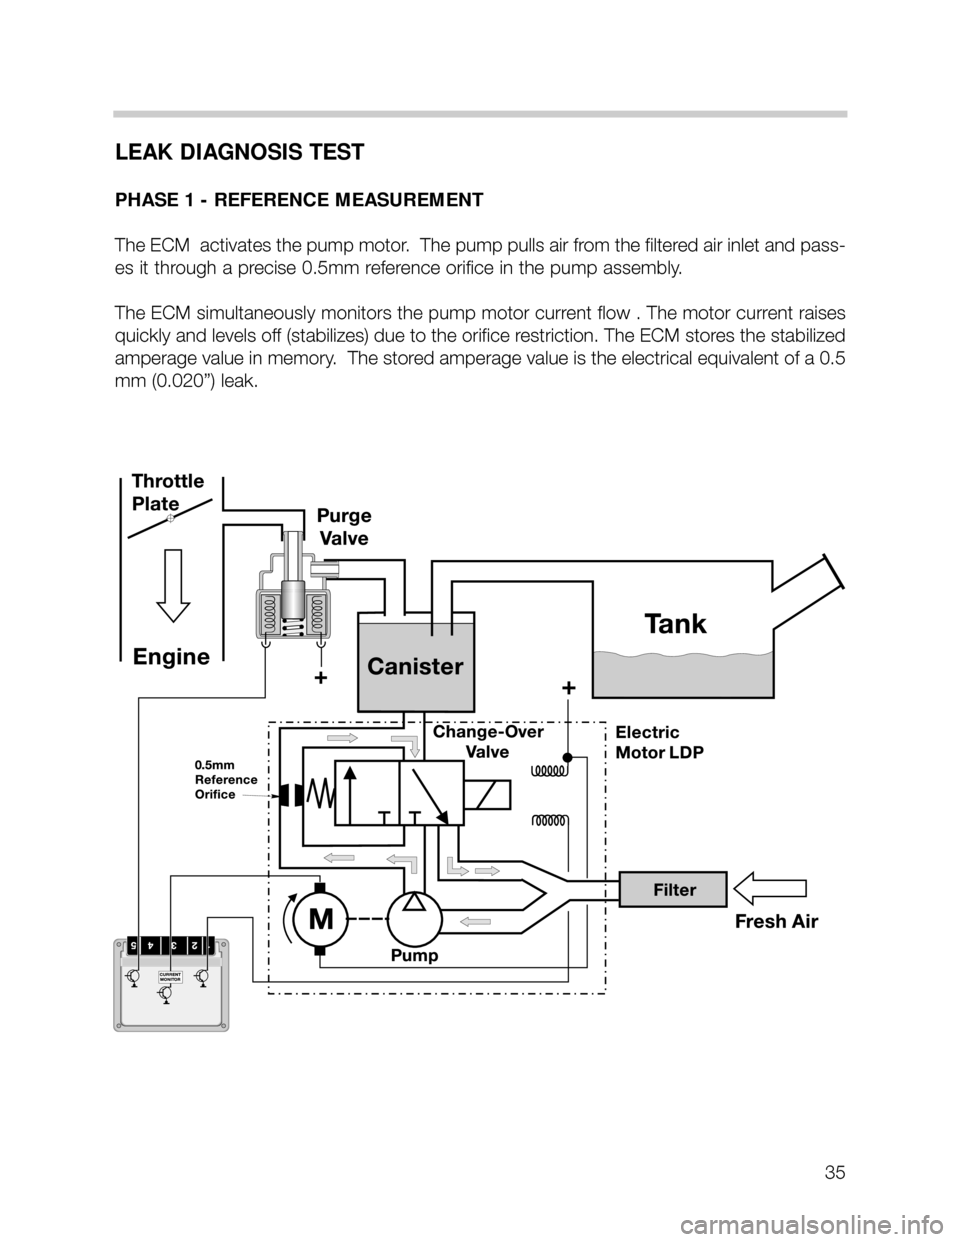 BMW X5 2005 E53 M62TU Engine Owners Guide LEAK DIAGNOSIS TEST
PHASE 1 - REFERENCE MEASUREMENT
The ECM  activates the pump motor.  The pump pulls air from the filtered air inlet and pass-
es it through a precise 0.5mm reference orifice in the 